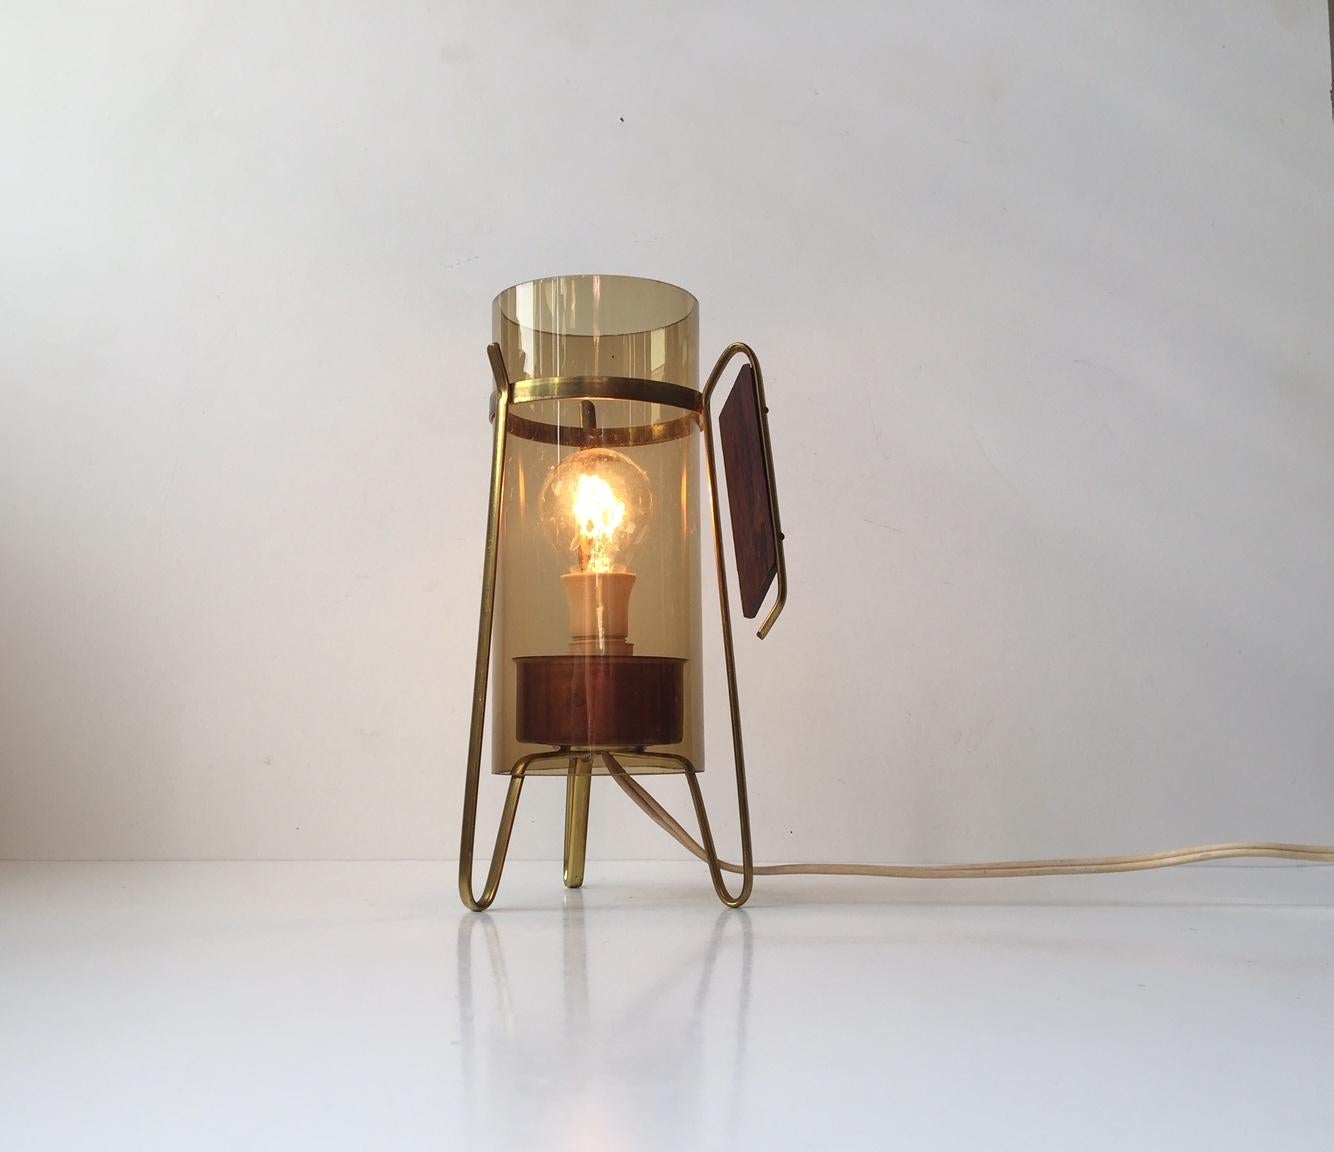 This small, decorative table lamp is made from brass, copper, and smoked glass. The handle is solid rosewood. Anonymous Scandinavian maker, 1960s.